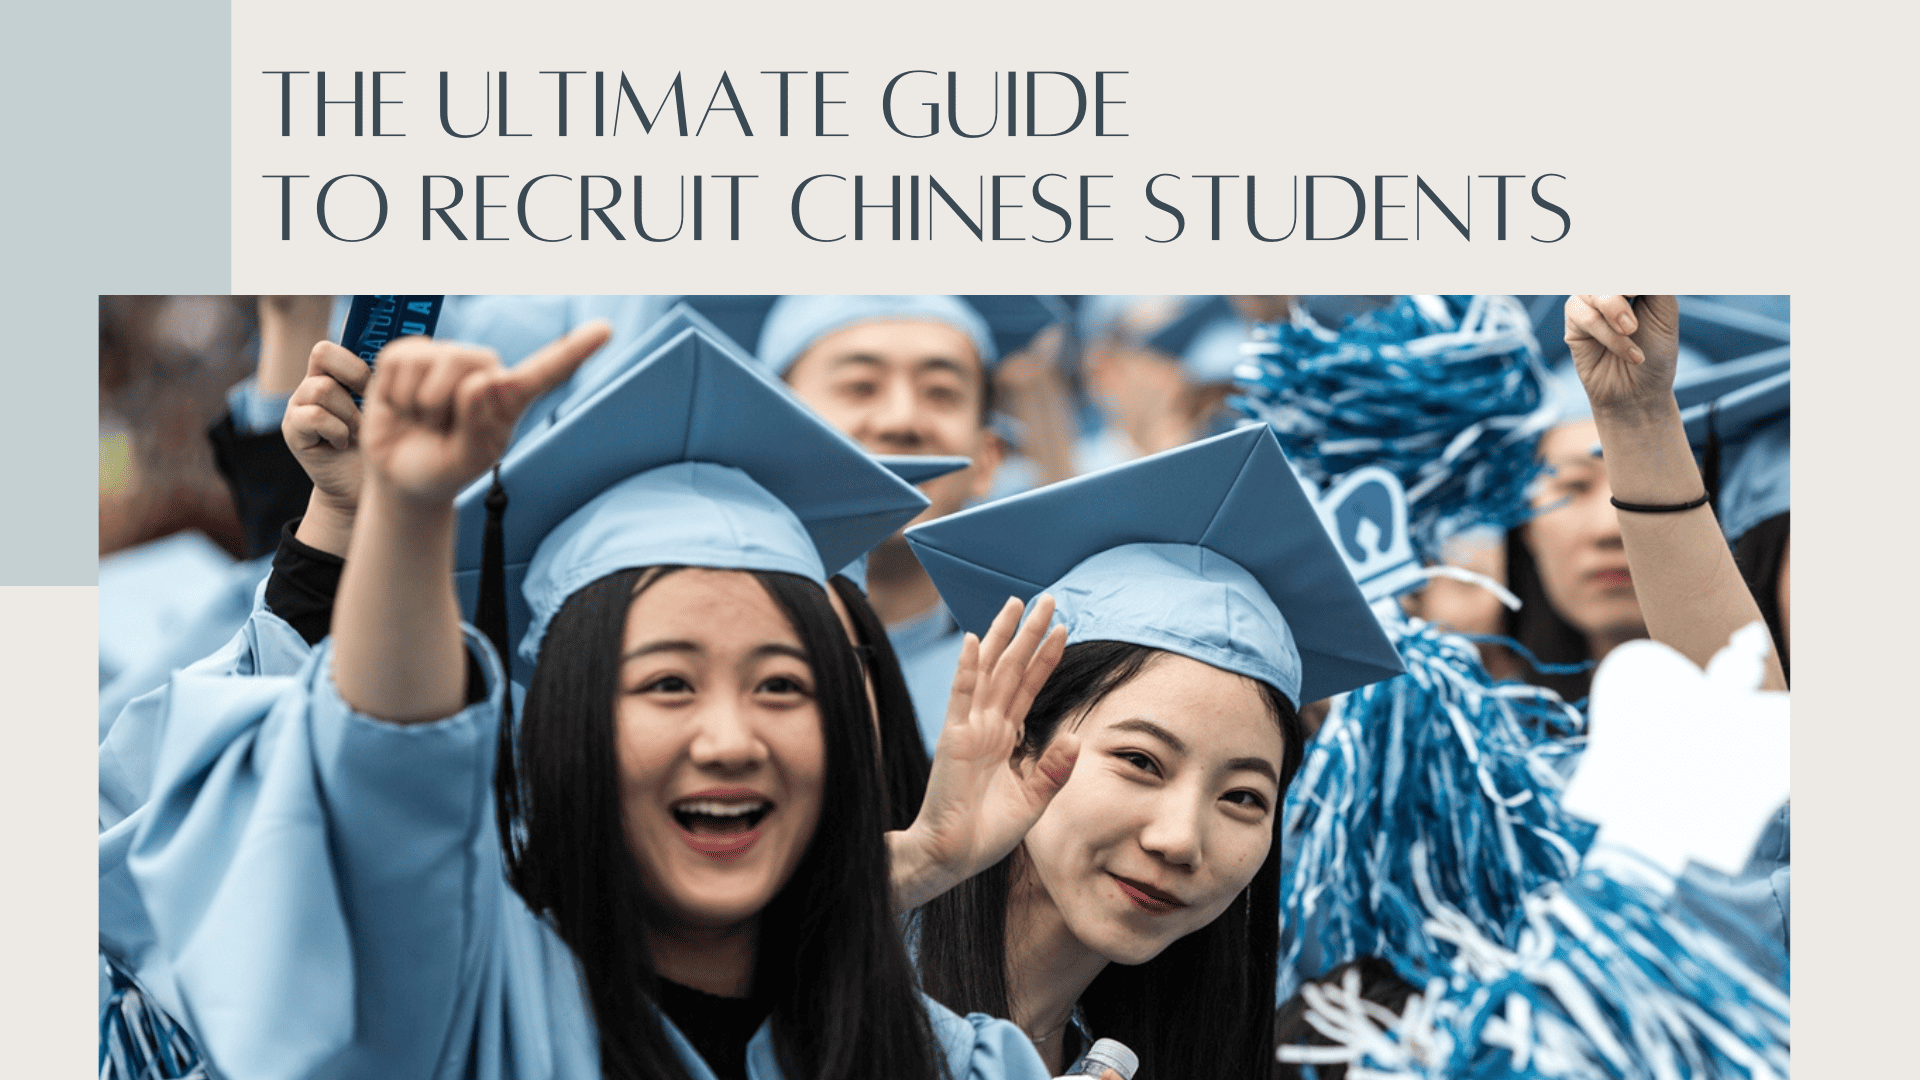 How to recruit Chinese students: banner